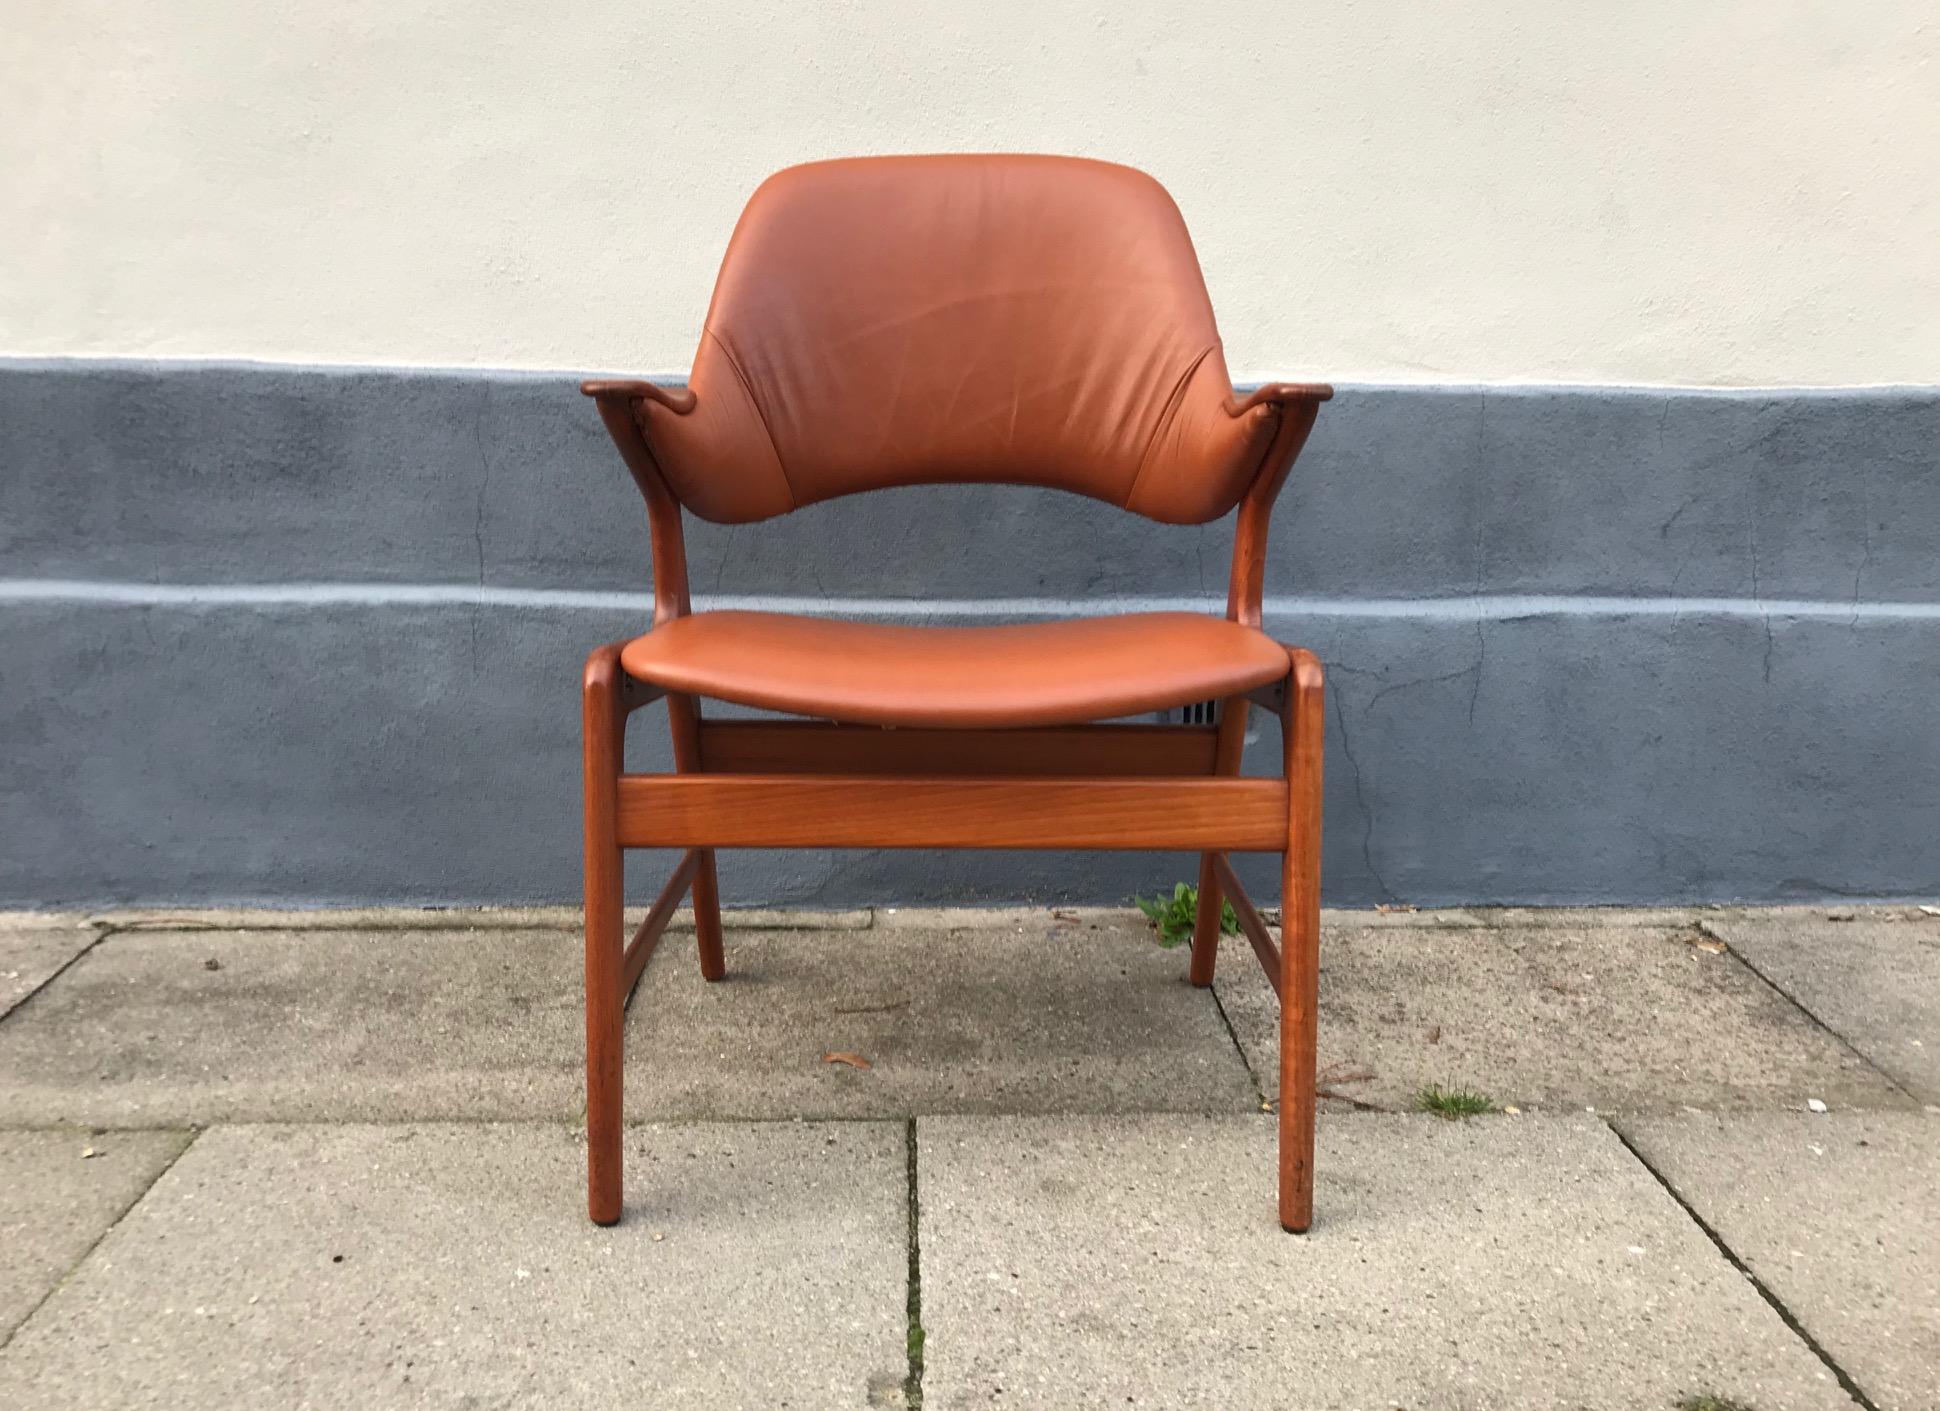 Danish Modern Teak and Leather Lounge Chair by N. A. Jørgensen, 1960s For Sale 2